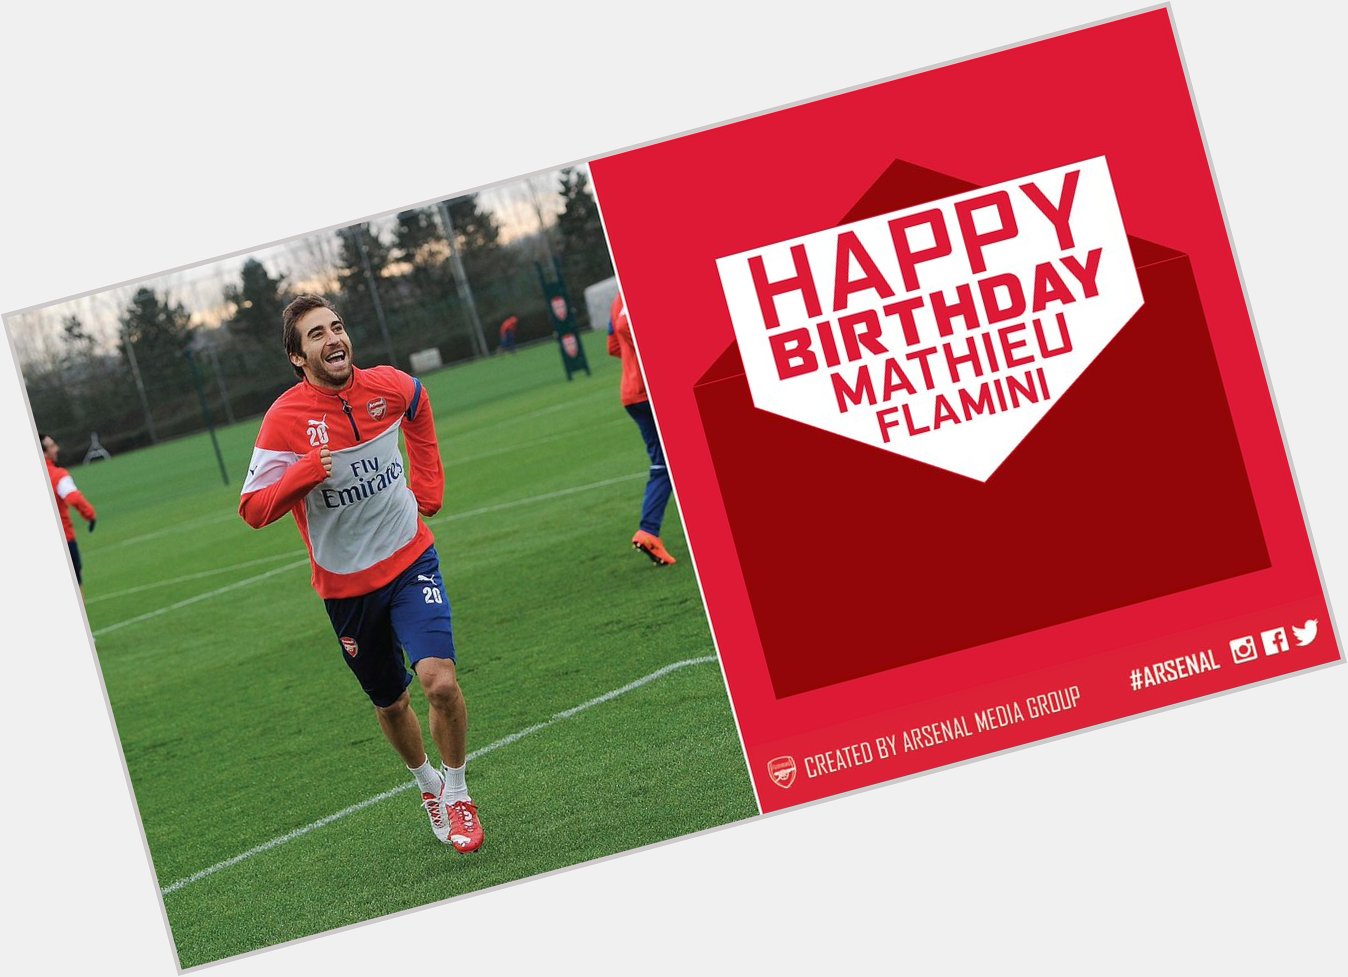 Morning and happy birthday to Mathieu Flamini! Read a classic interview with the Frenchman:  